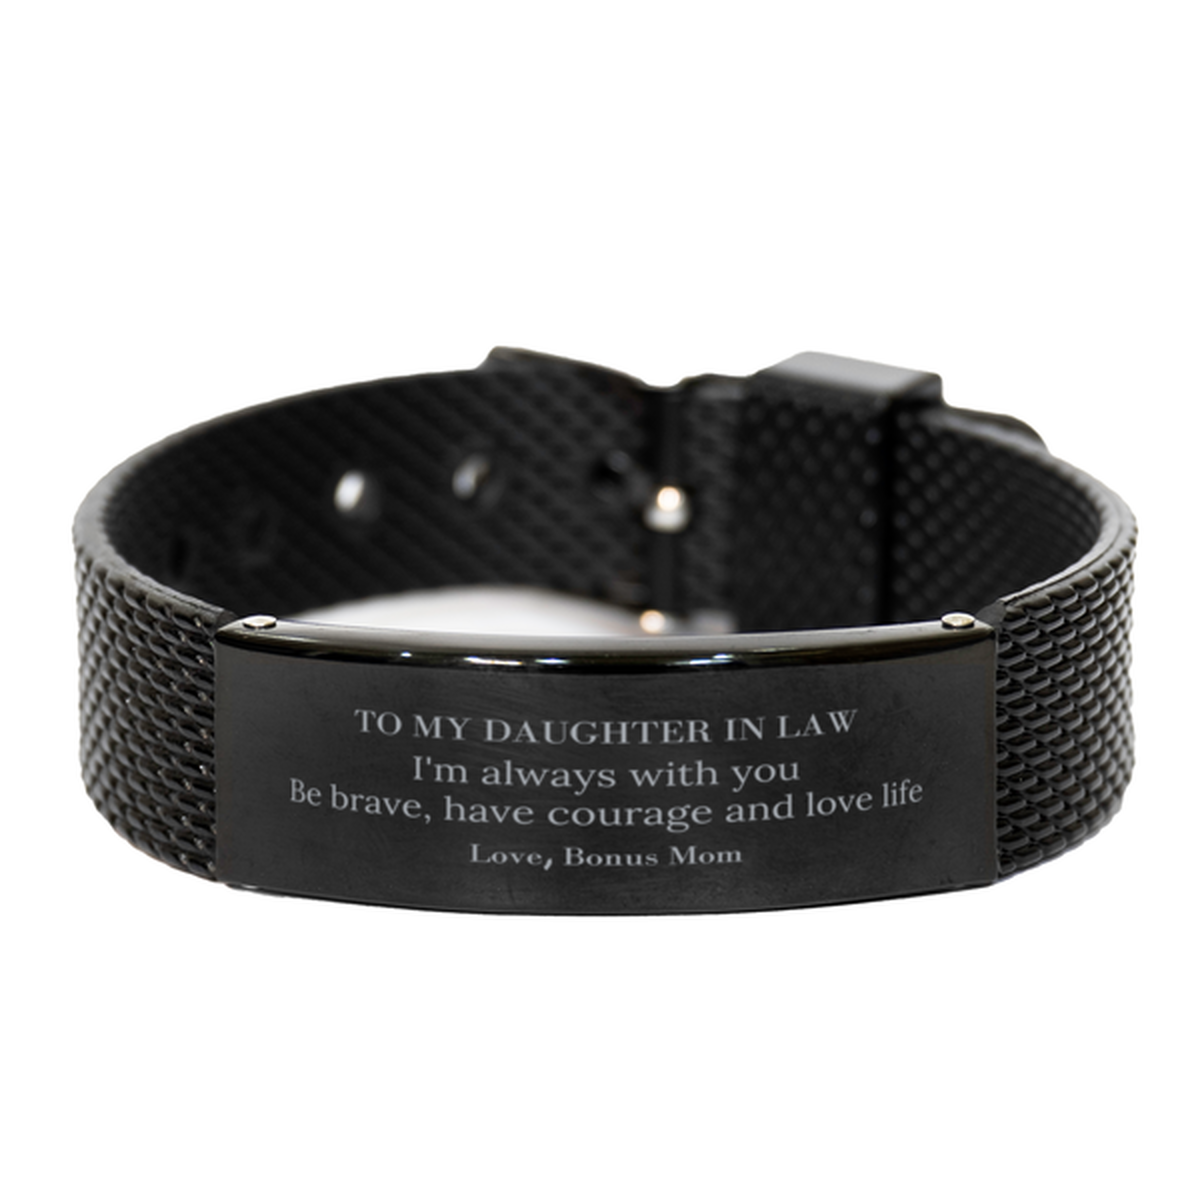 To My Daughter In Law Gifts from Bonus Mom, Unique Black Shark Mesh Bracelet Inspirational Christmas Birthday Graduation Gifts for Daughter In Law I'm always with you. Be brave, have courage and love life. Love, Bonus Mom